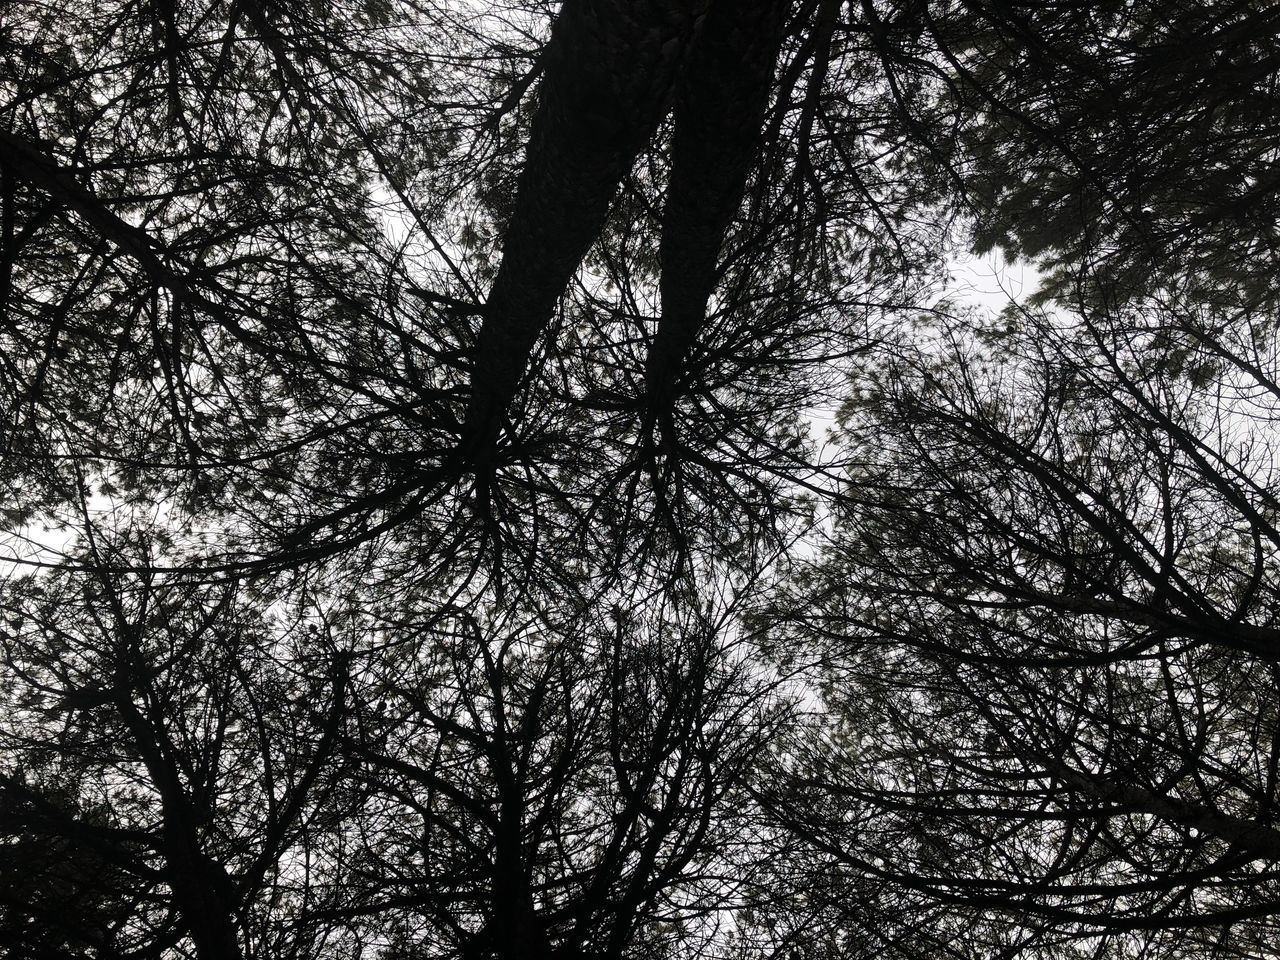 LOW ANGLE VIEW OF SILHOUETTE TREE IN FOREST